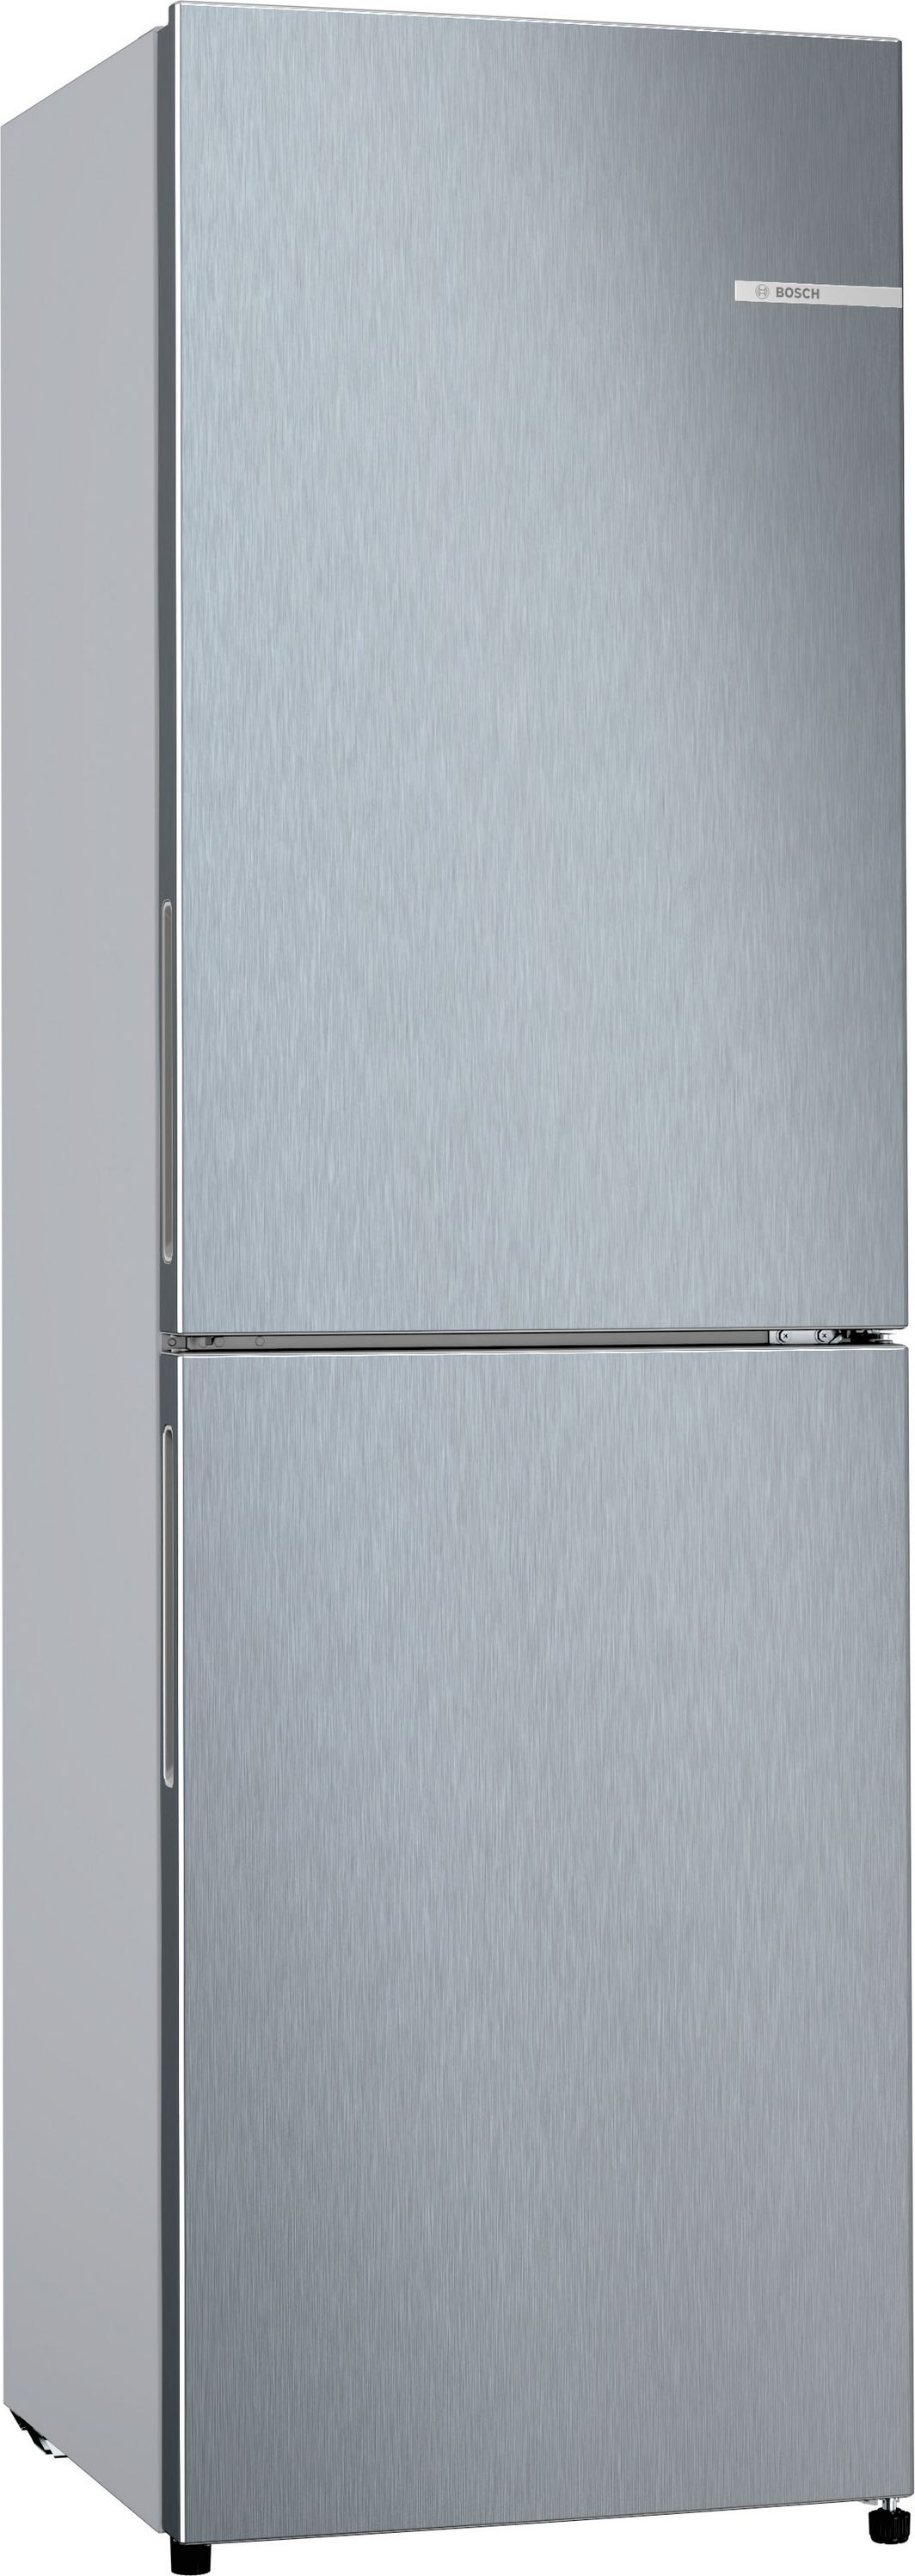 Bosch Series 2 KGN27NLEAG 50/50 Frost Free Fridge Freezer - Stainless Steel Effect - E Rated, Stainless Steel